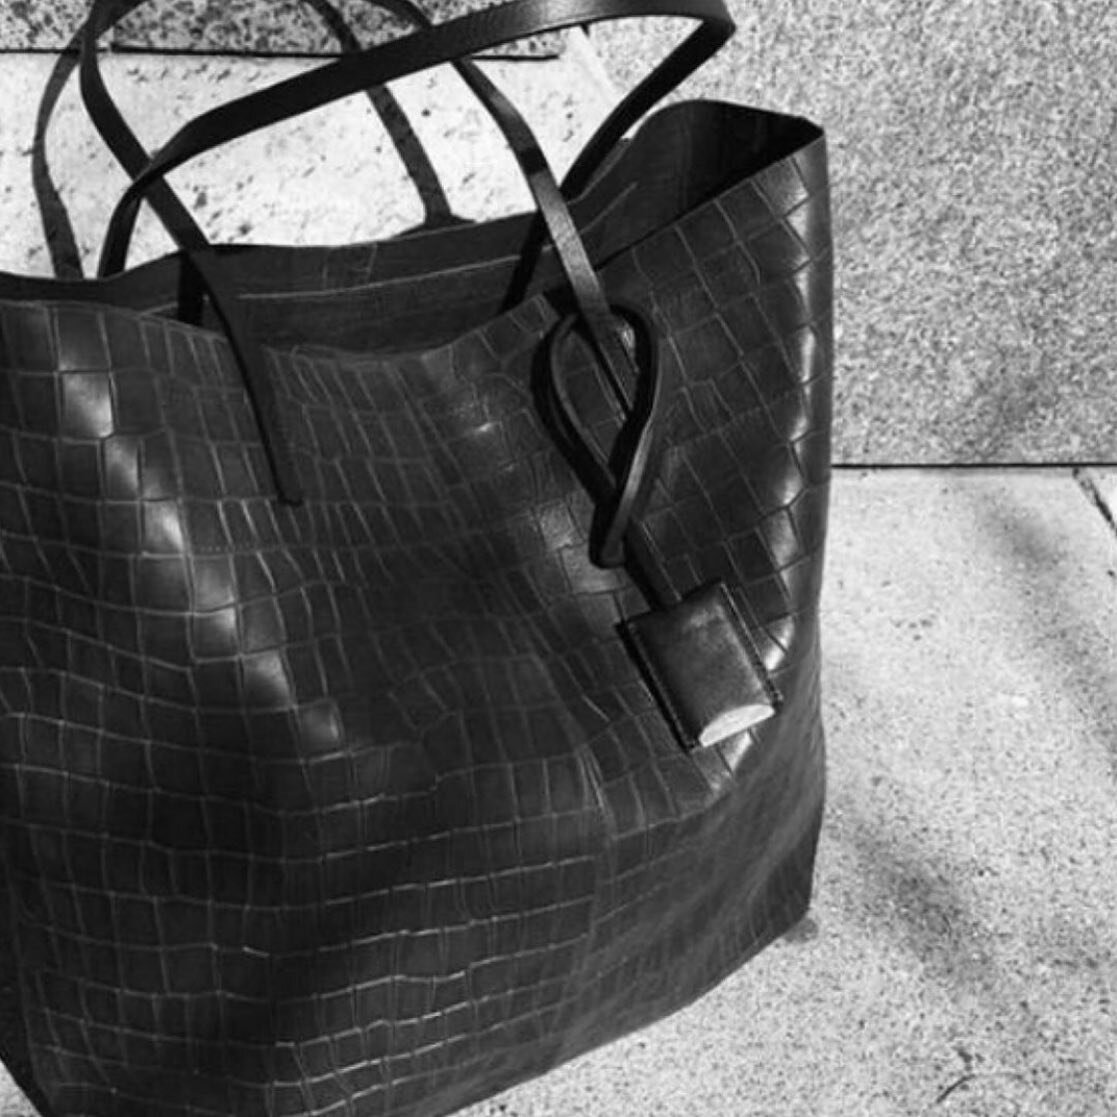 Gouverneur M - Alligator embossed - Black
repost @marouch__mjmarouch 
.
.
.
#lindegallerystbarth  #casualluxury #timeless #pieces #madeinfrance